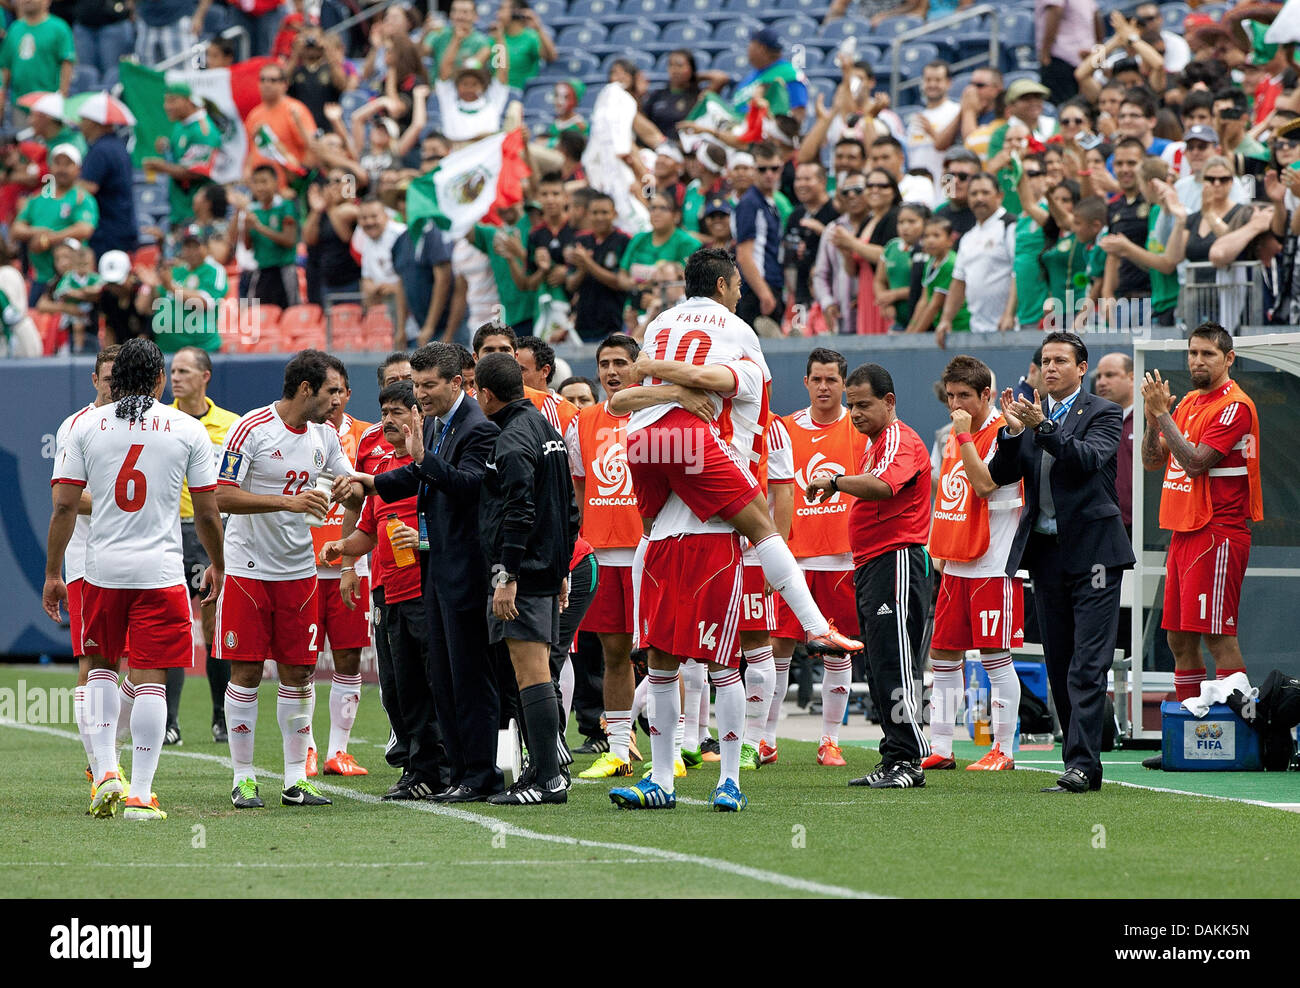 July 14, 2013 - Denver, Colorado, U.S - Mexico's MARCO FABIAN, center, gets congrats from team mates on the sidelines after scoring the 1st. goal of the game during the 1st. half at Sports Authority Field at Mile High Sunday afternoon. Mexico defeats Martinique 3-1. (Credit Image: © Hector Acevedo/ZUMAPRESS.com) Stock Photo